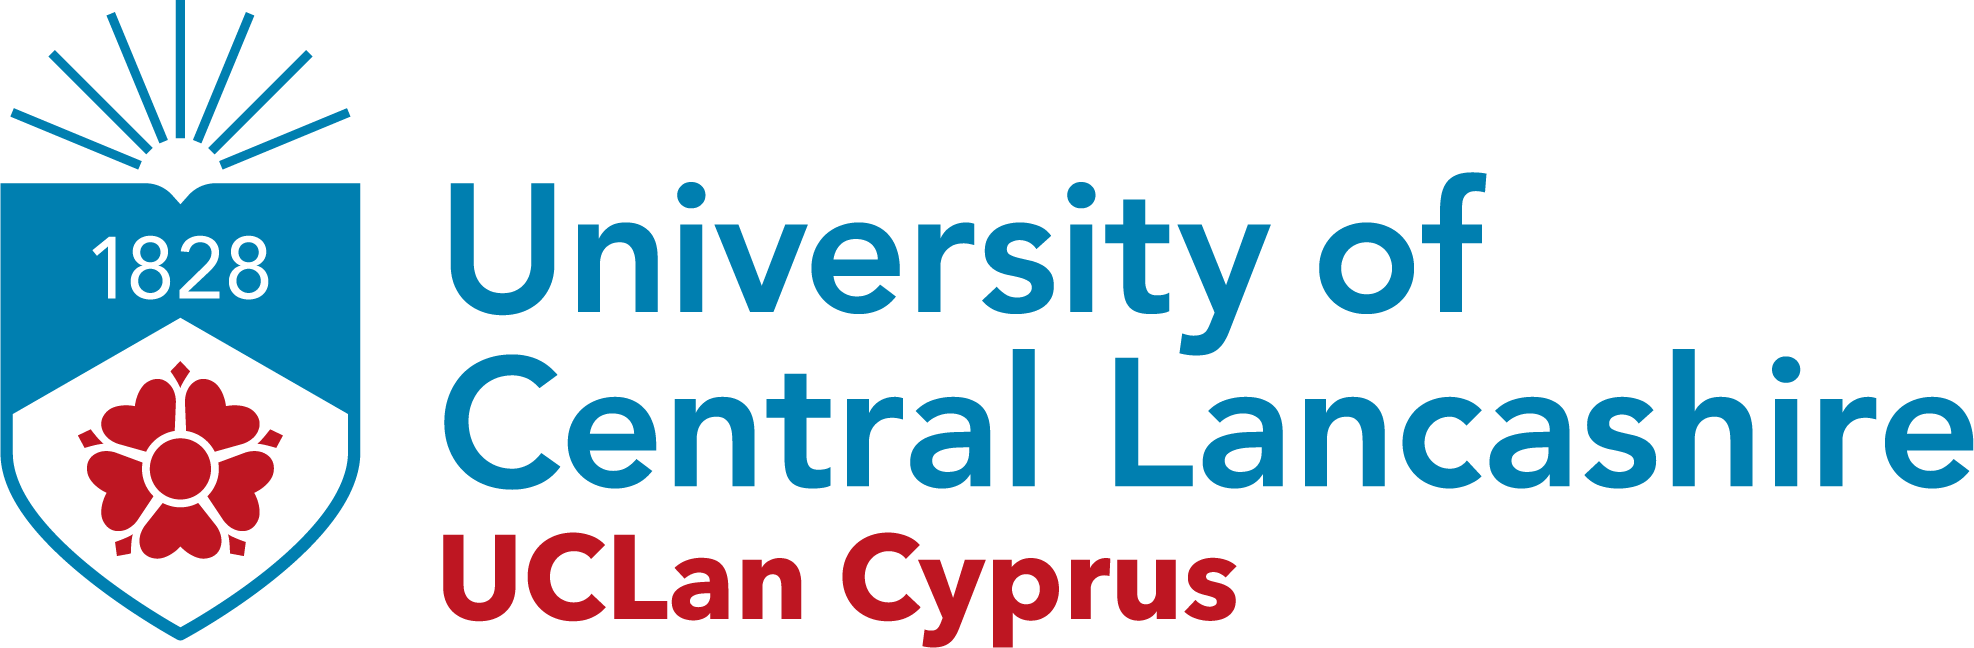 UCLan Cyprus offers a unique advantage of British education, in Cyprus/EU